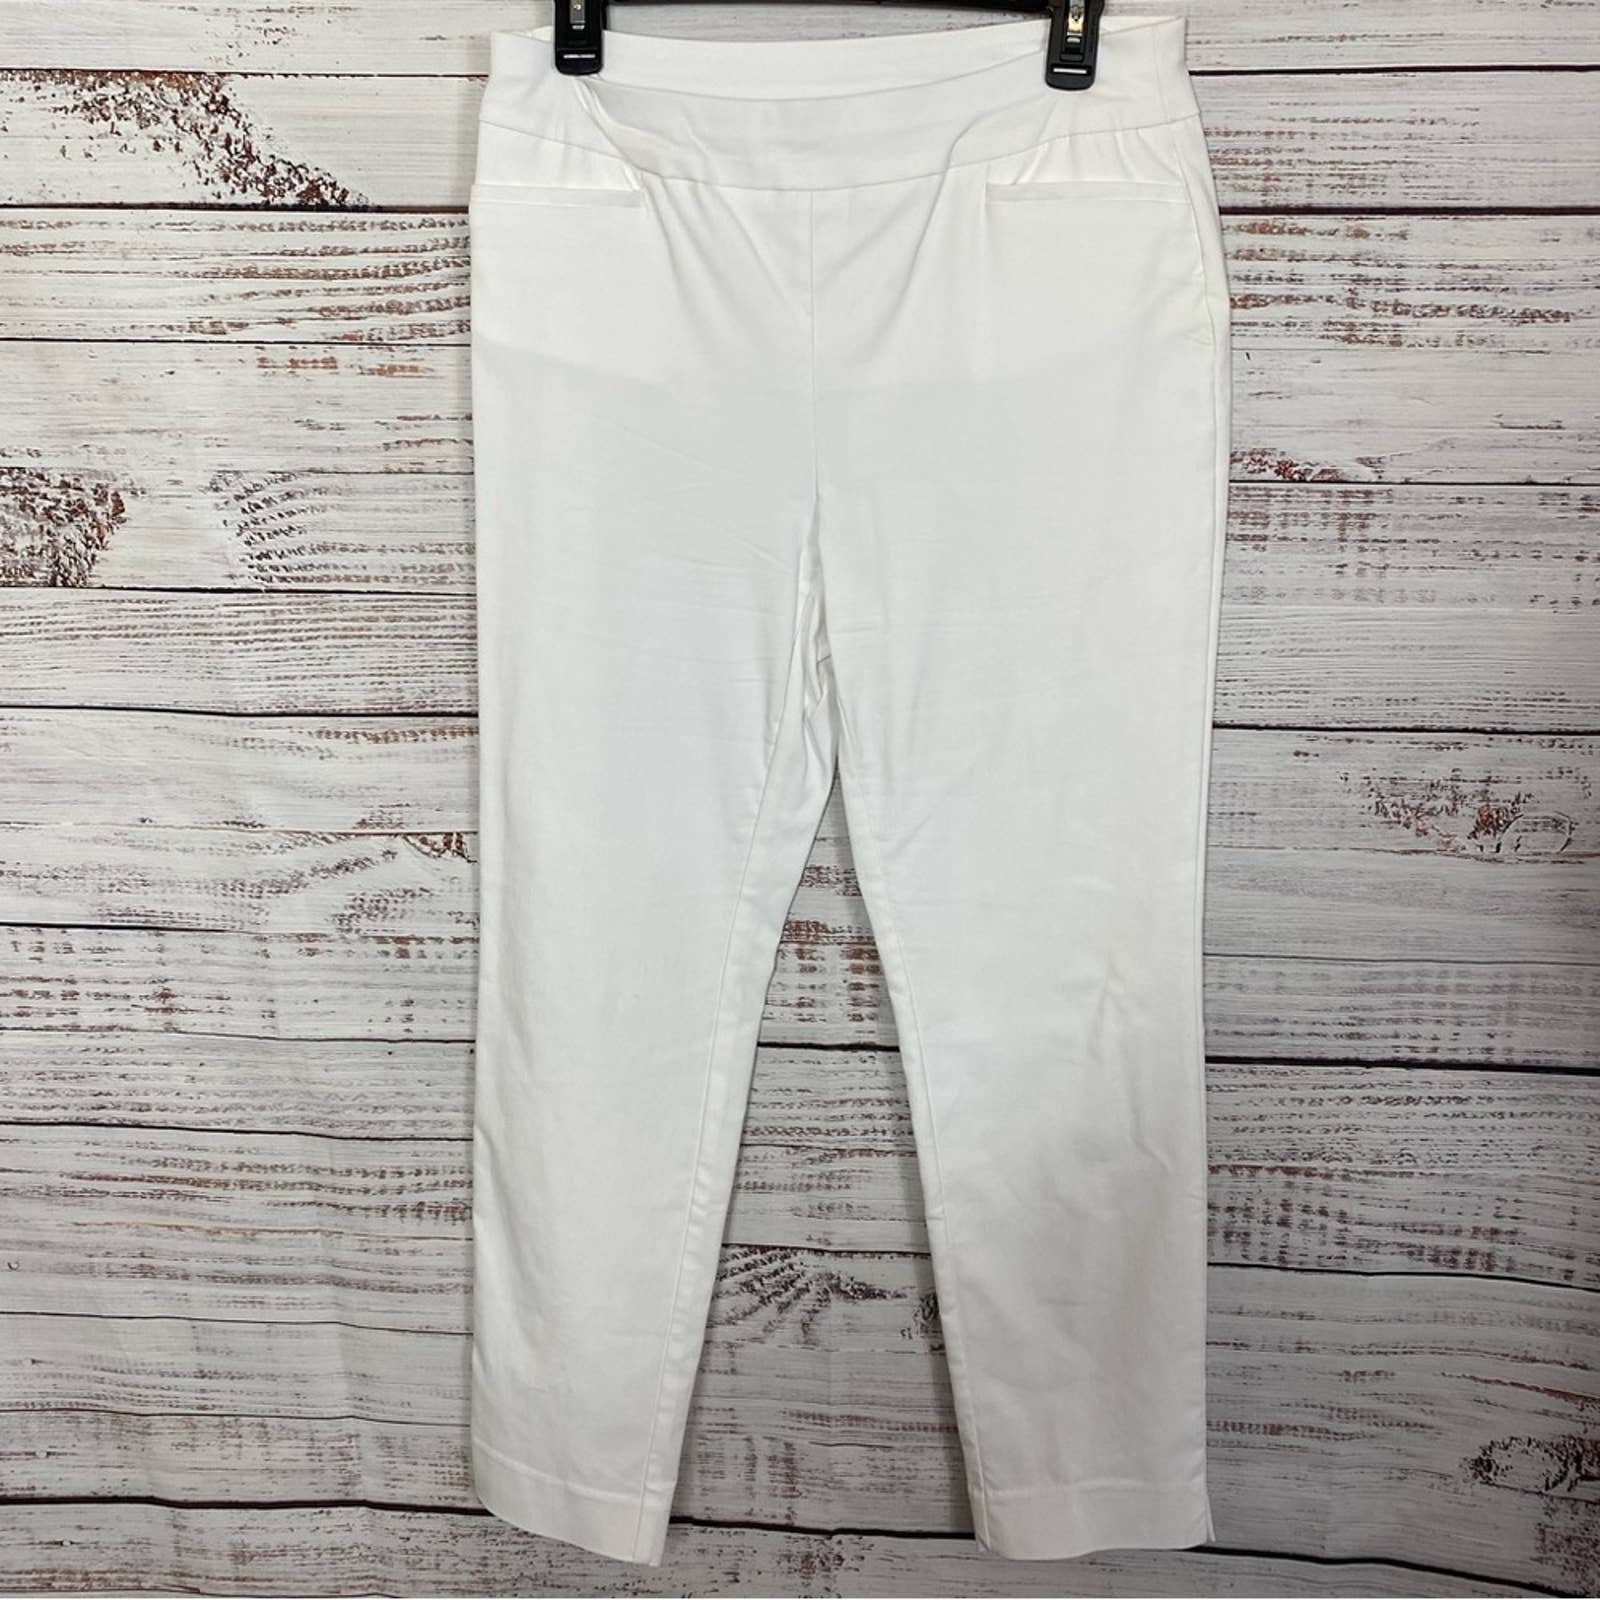 Wholesale price CHICO’S WHITE PULL ON RAYON ANKLE PANTS